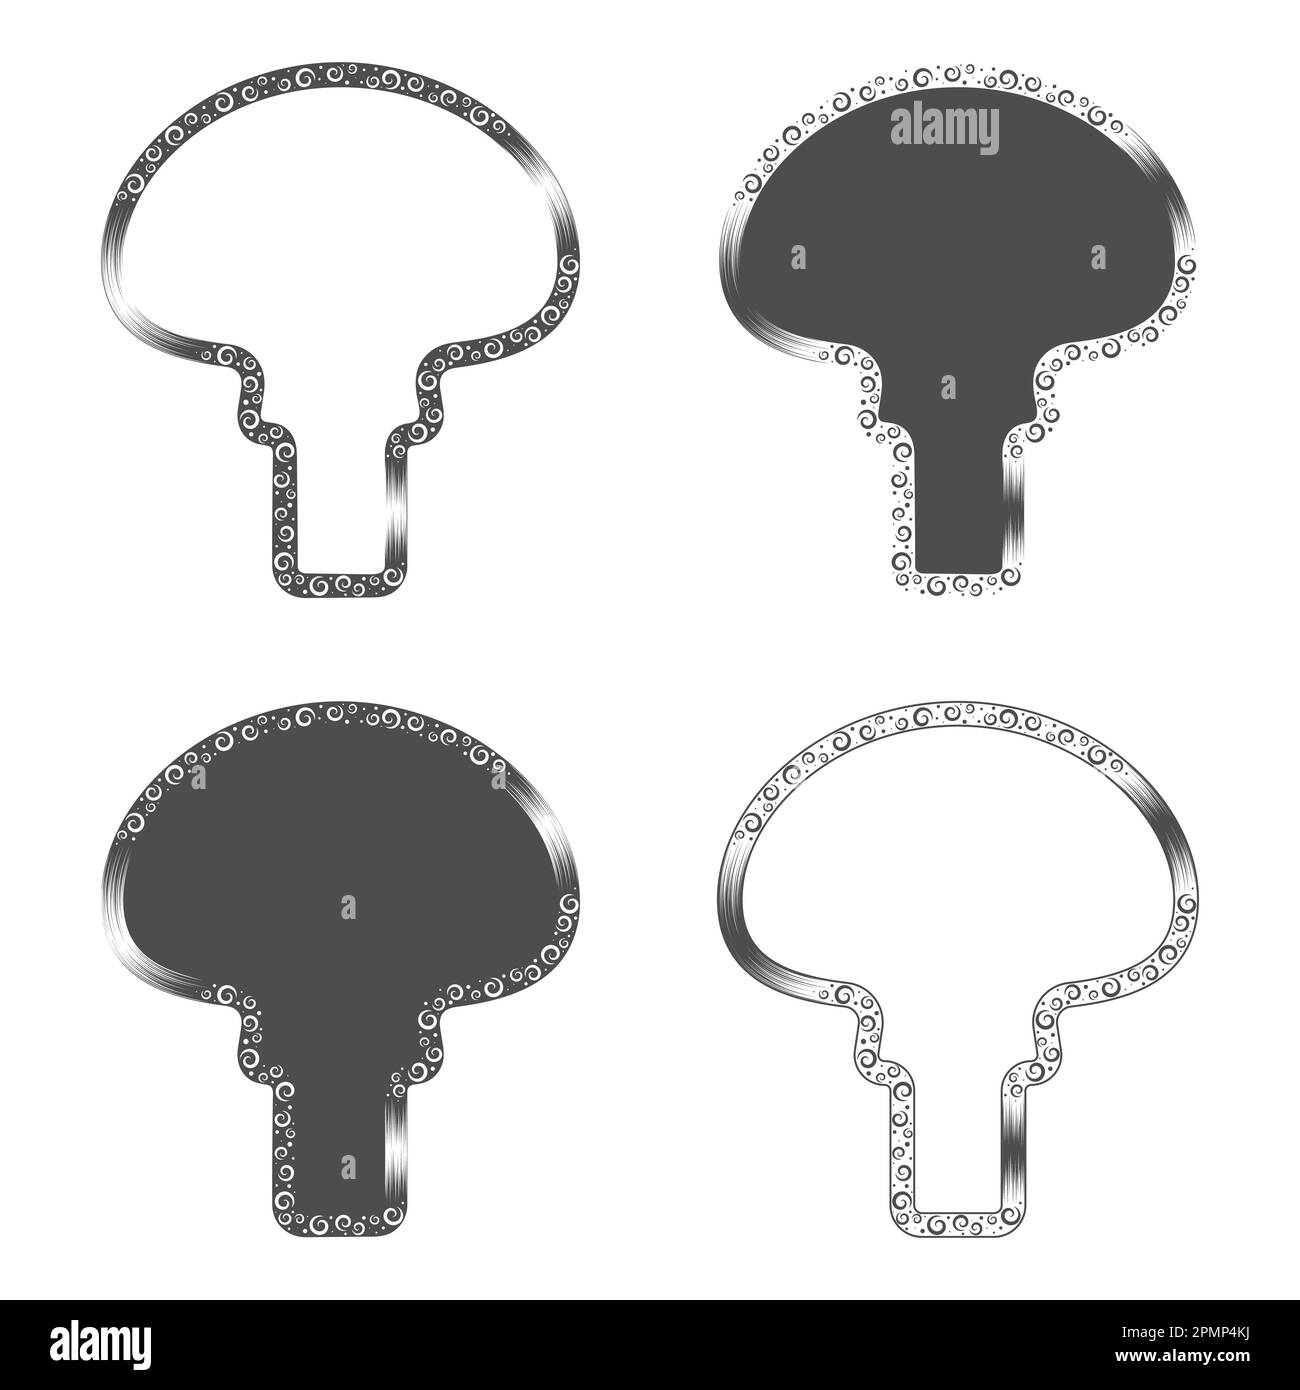 Set of black and white illustration with fly agaric mushroom. Isolated vector objects on white background. Stock Vector